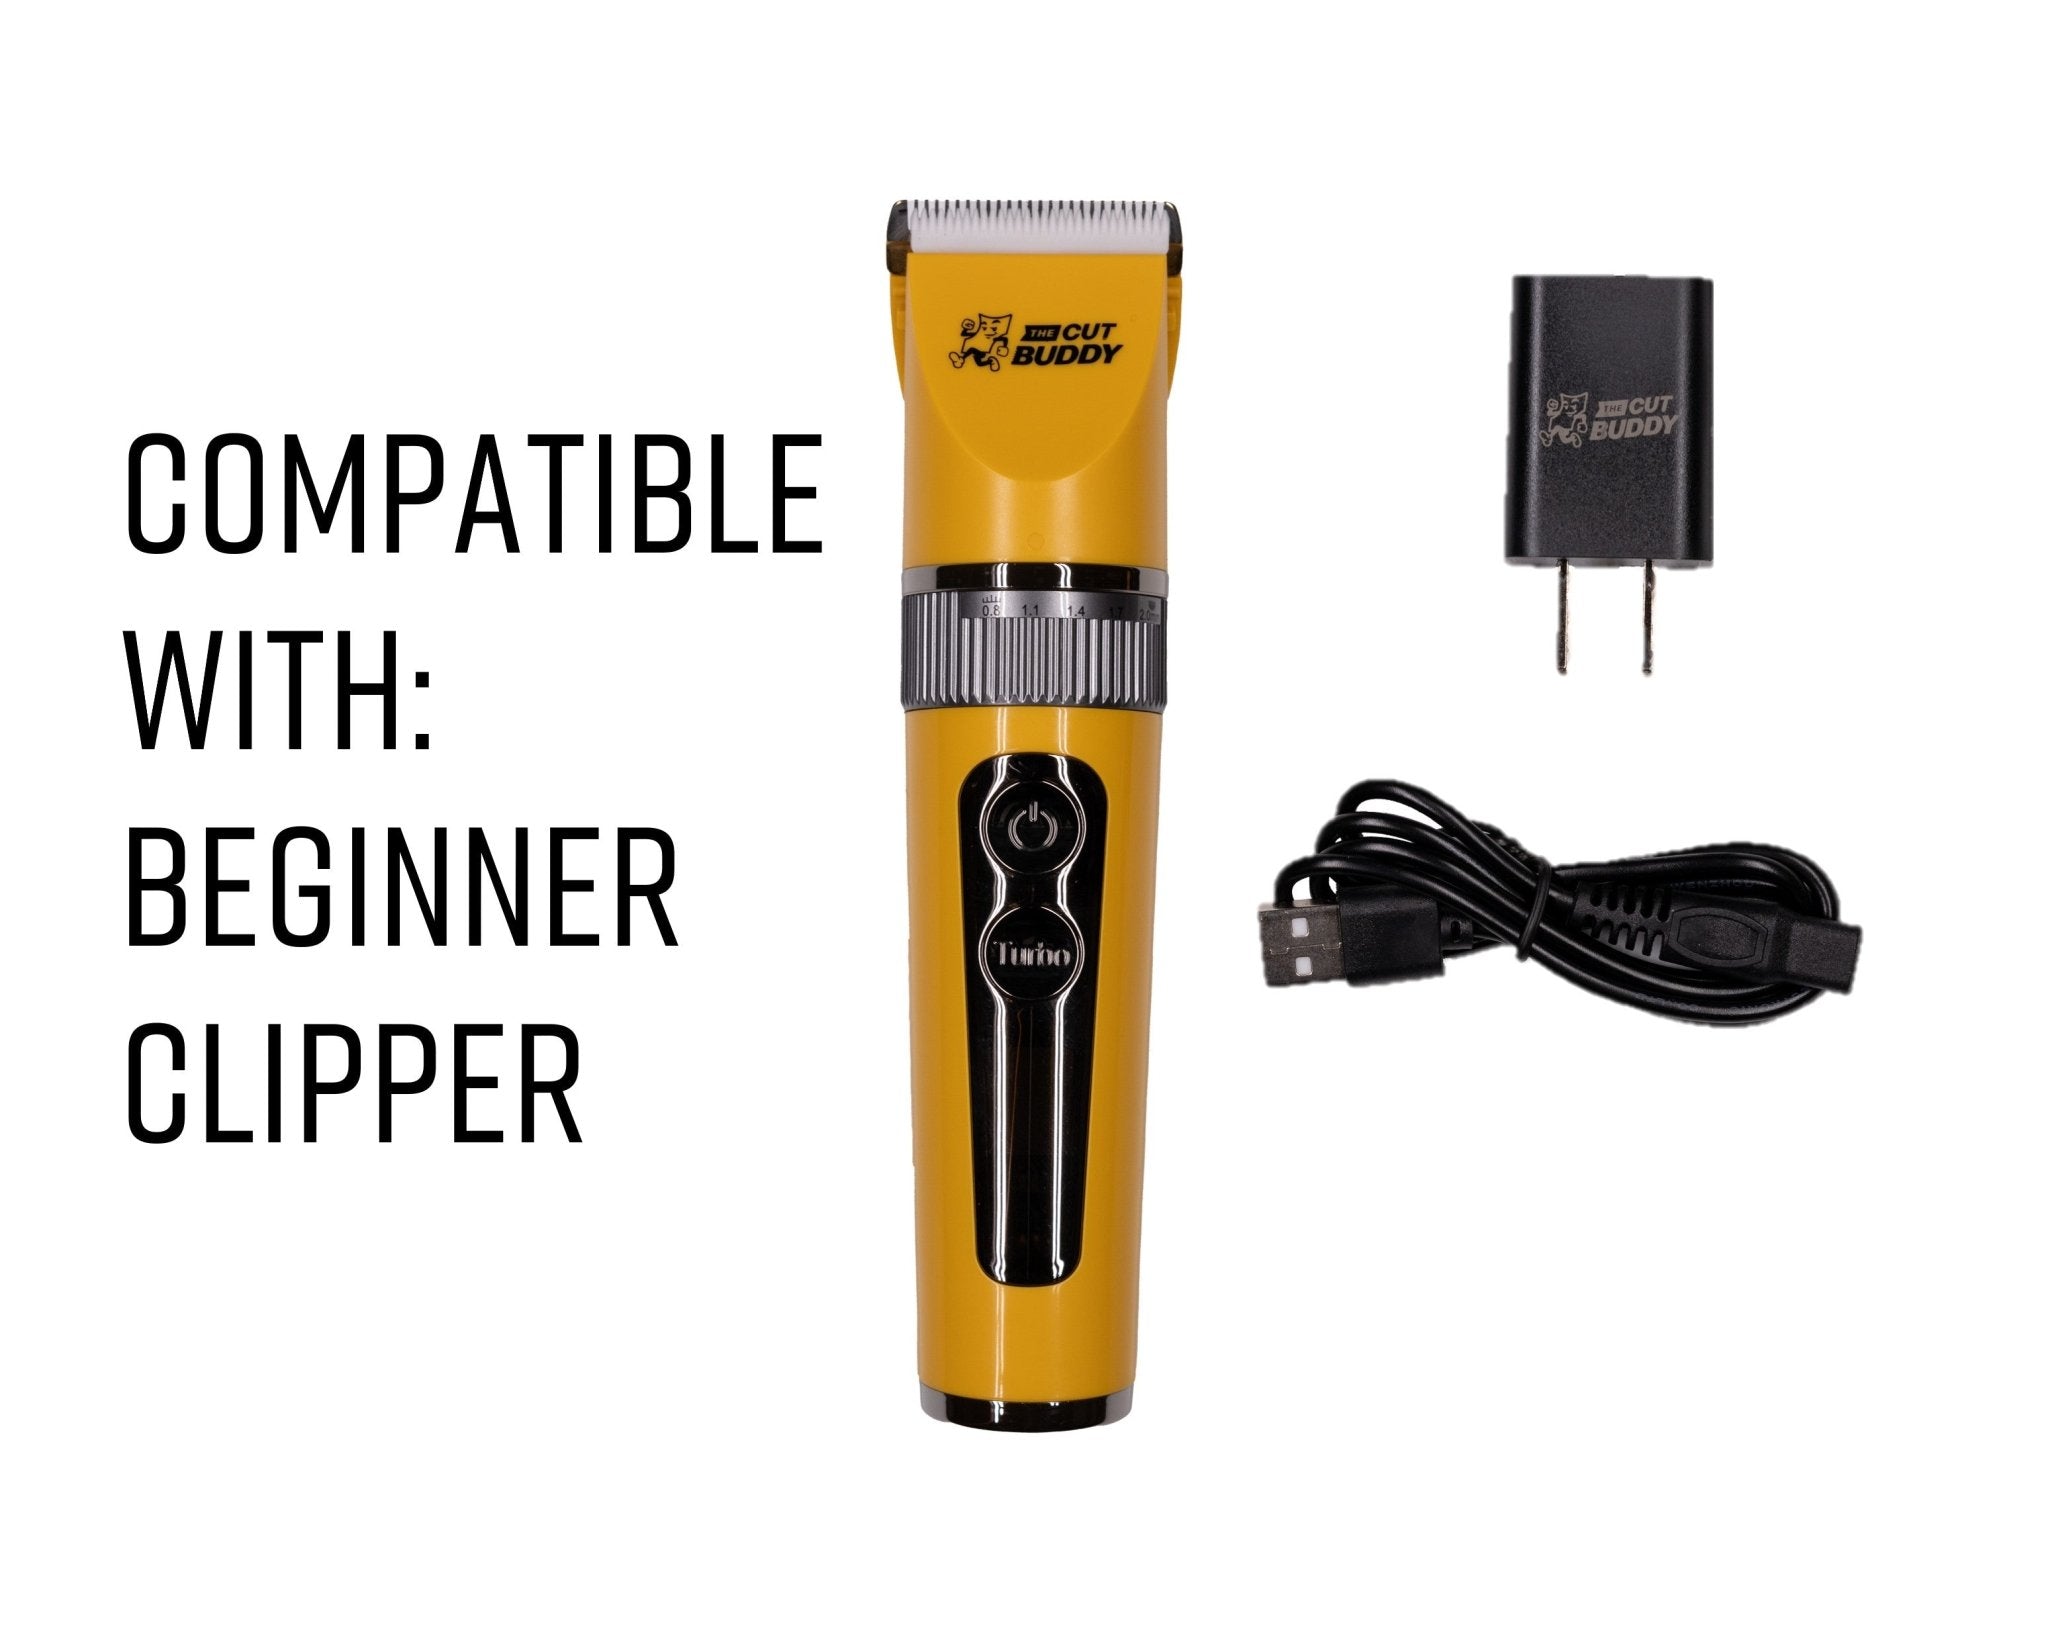 Charger and Adapter for Beginners Clipper - The Cut Buddy-The Cut Buddy